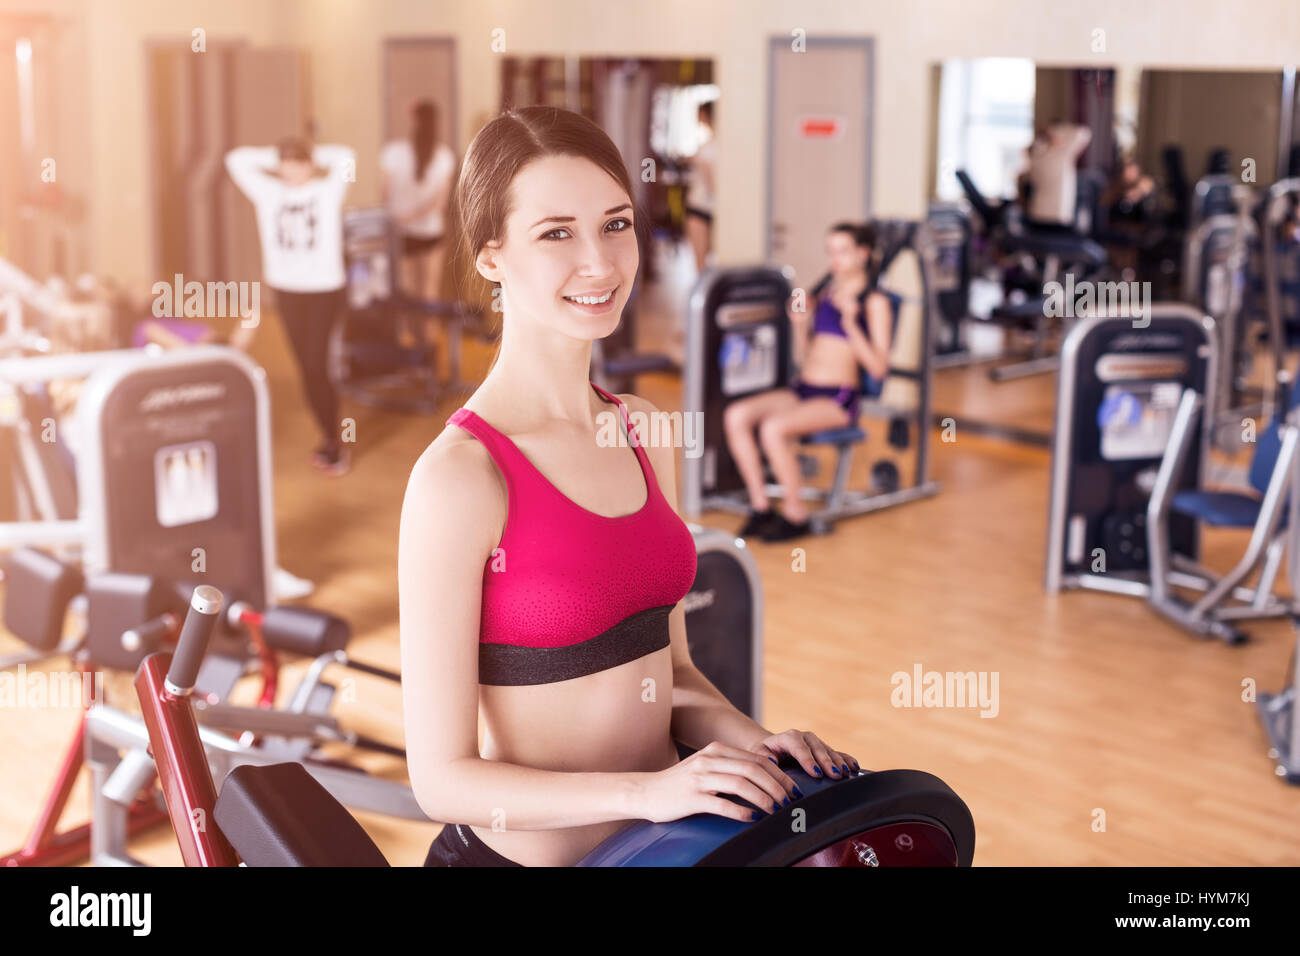 Young woman doing exercises in gym Stock Photo